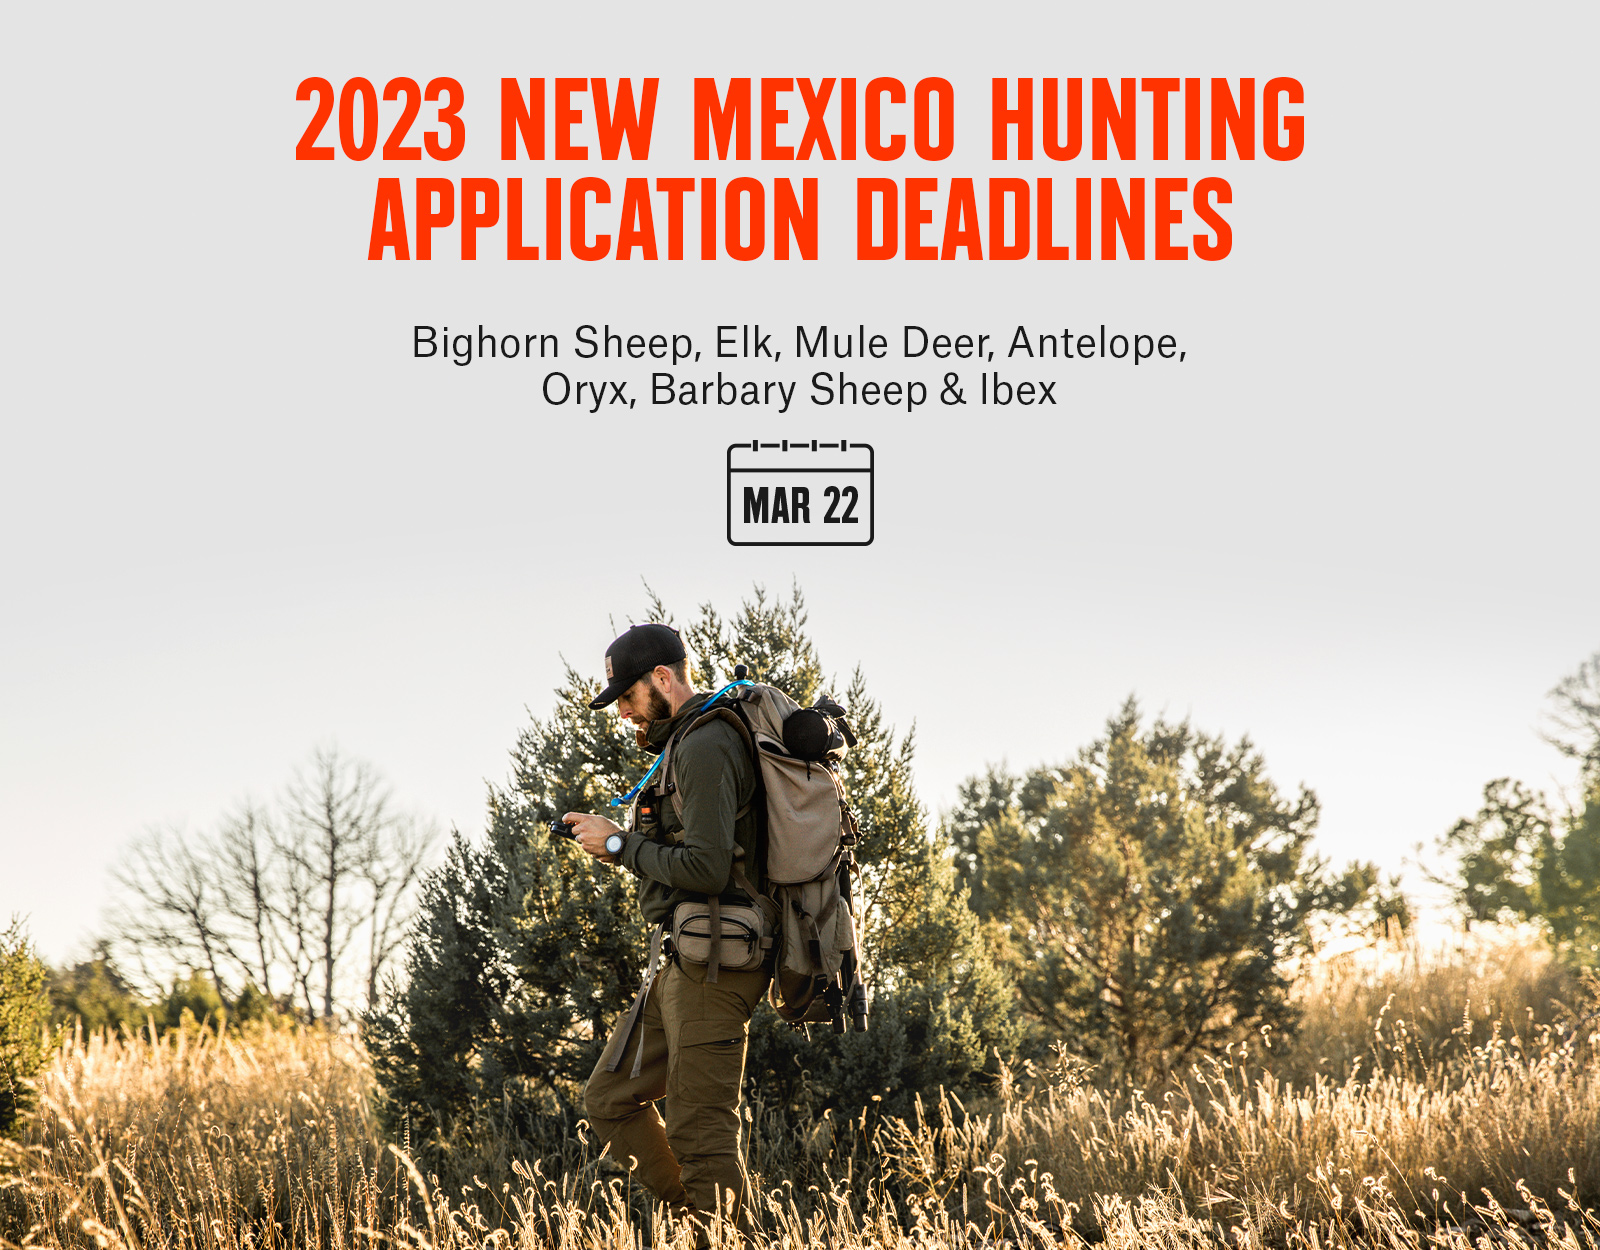 Hunting application deadlines for New Mexico